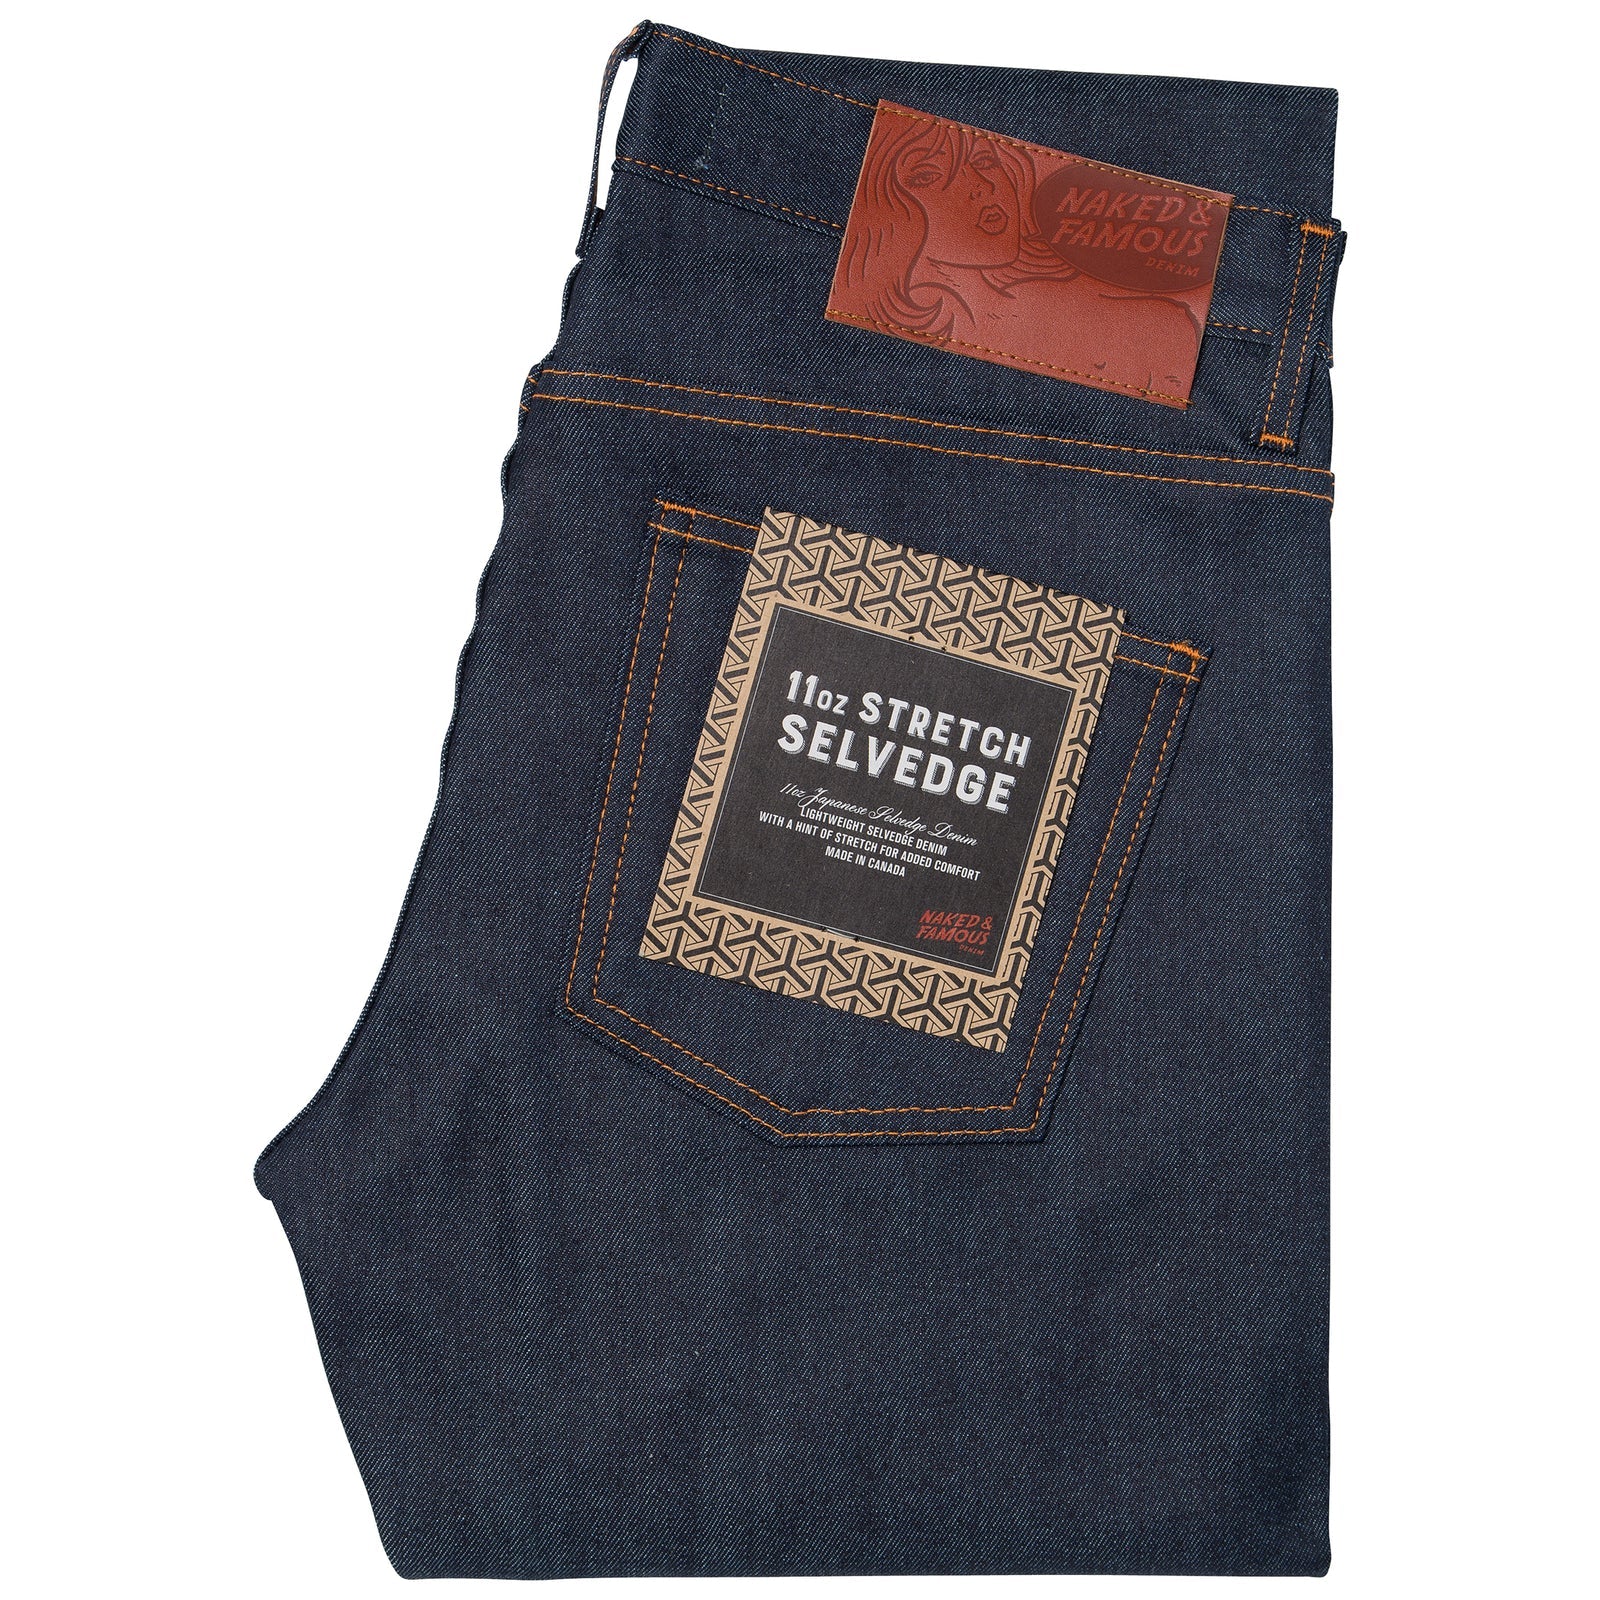 Naked and Famous Men's Super Skinny Guy 11oz Stretch Selvedge 015500.